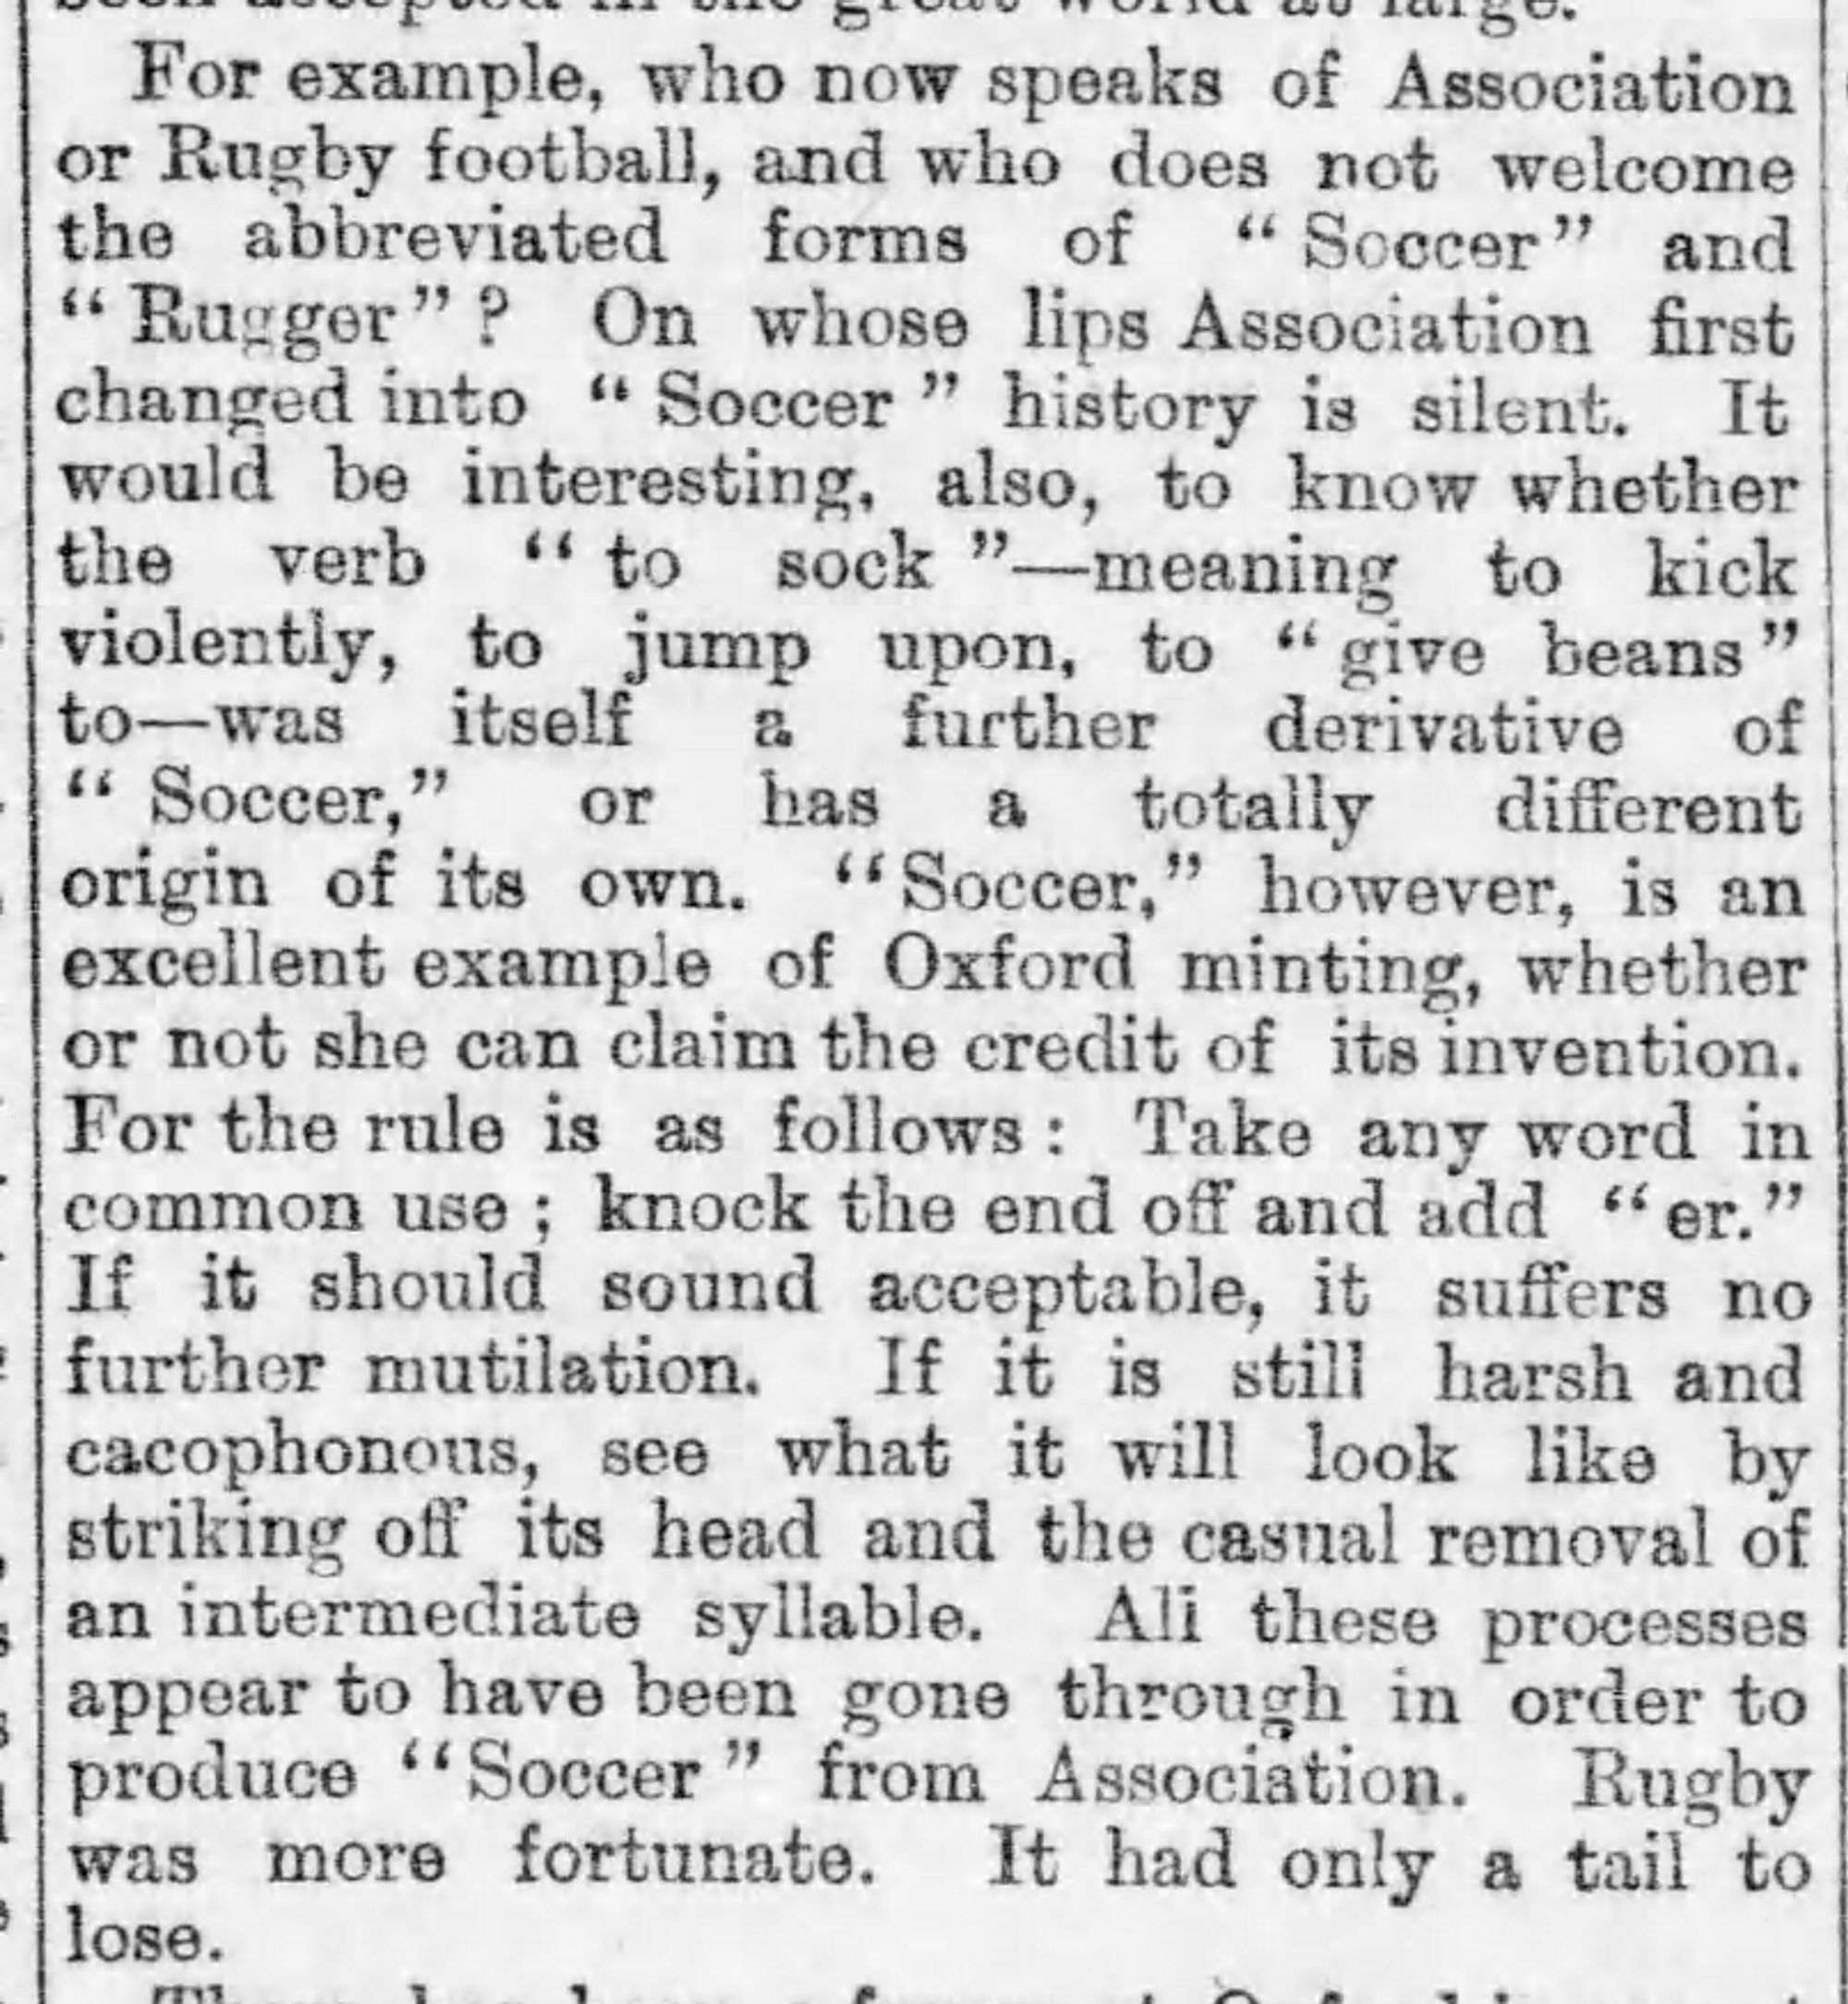 Screenshot of text in a column in The Daily Telegraph newspaper from 1899. It reads: For example, who now speaks of Association or Rugby football, and who does not welcome the abbreviate forms of "Soccer" and "Rugger"? On whose lips Association first changed into "Soccer" history is silent. It would be interesting, also, to know whether the verb "to sock"—-meaning to kick violently, to jump upon, to "give beans" to--was itself a further derivative of "Soccer," or has a totally different origin of its own. "Soccer," however, is an excellent example of Oxford minting, whether or not she can claim the credit of its invention. For the rule is as follows: Take any word in common use; knock the end off and add "er." If it should sound acceptable, it suffers no further mutiliation. If it is still harsh and cacophonous, see what it will look like by striking off its head and the casual removal of an intermediate syllable. All these processes appear to have been gone through in order to produce "Soccer" from Association. Rugby was more fortunate. It had only a tail to lose.